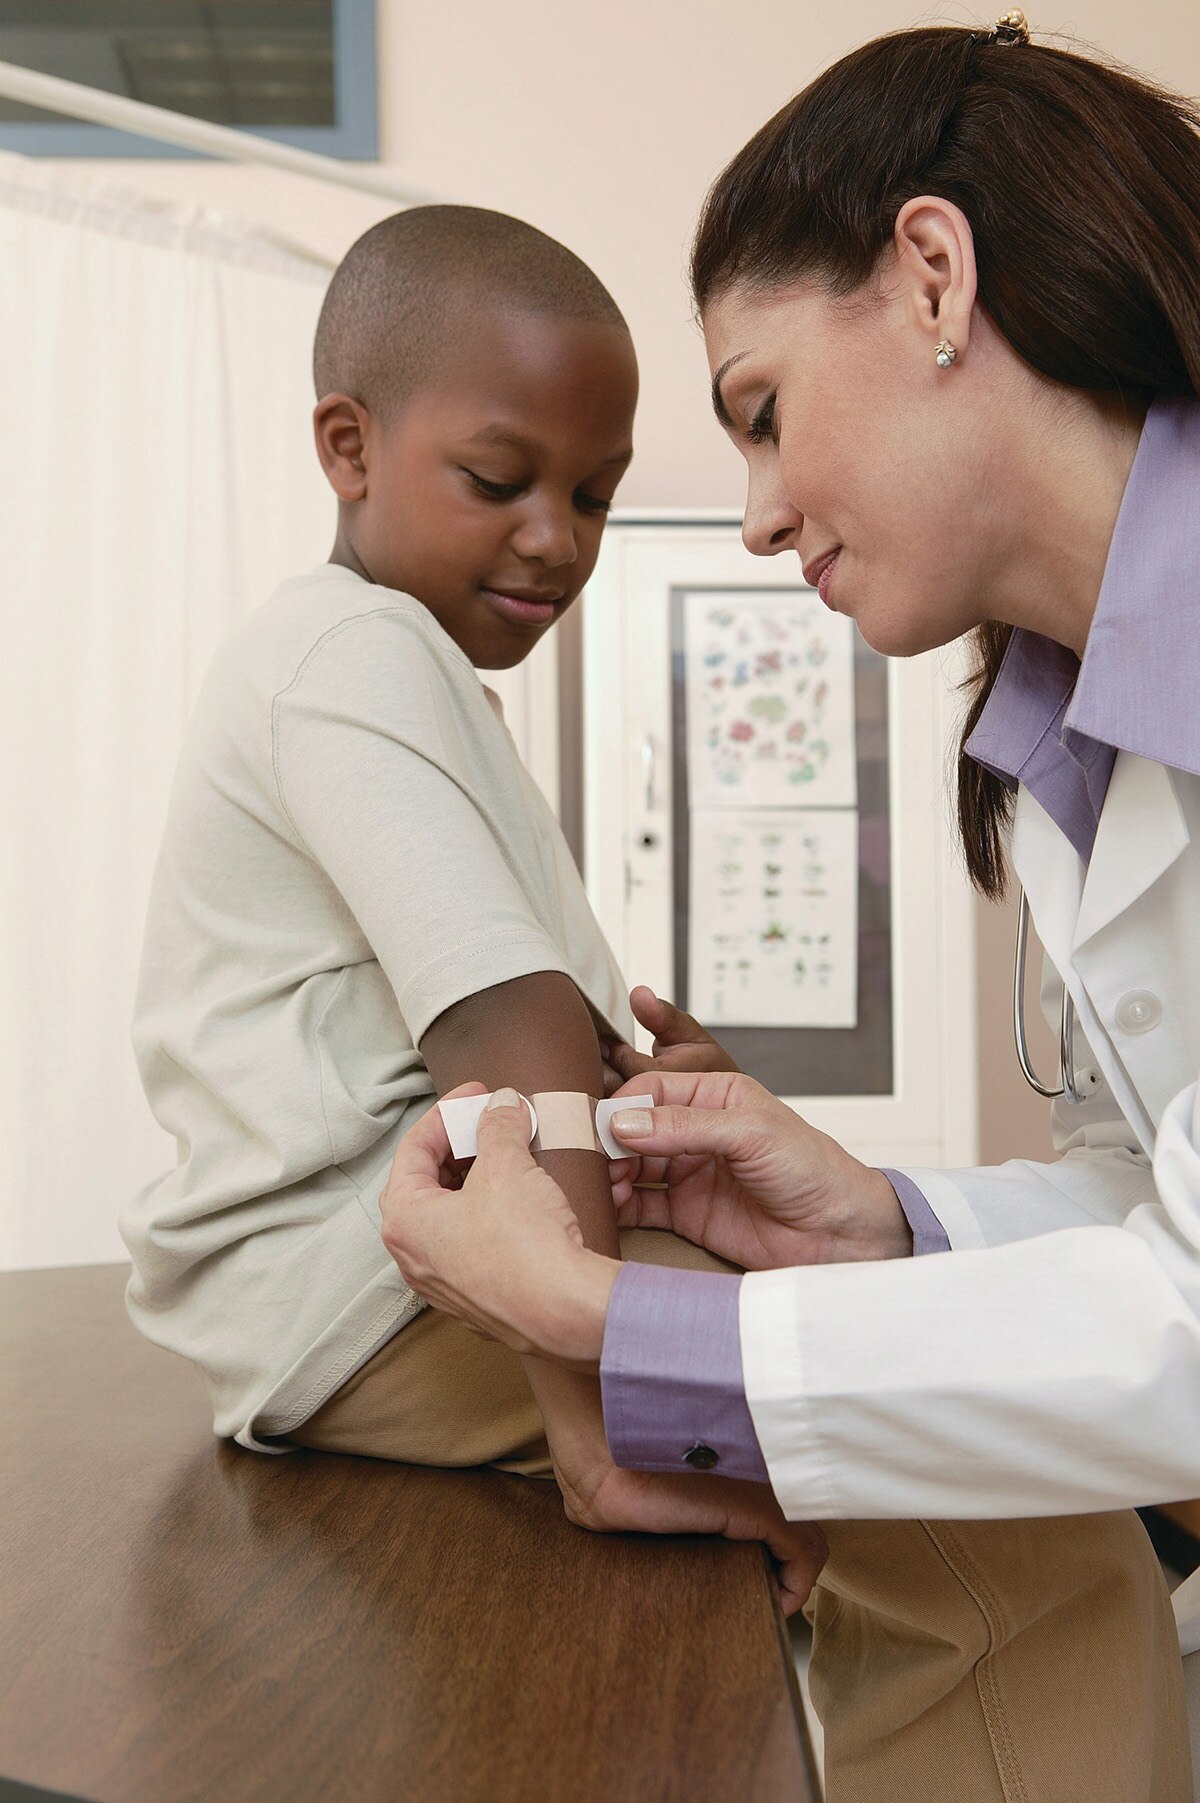  A doctor putting a Band-Aid on a boy's arm.